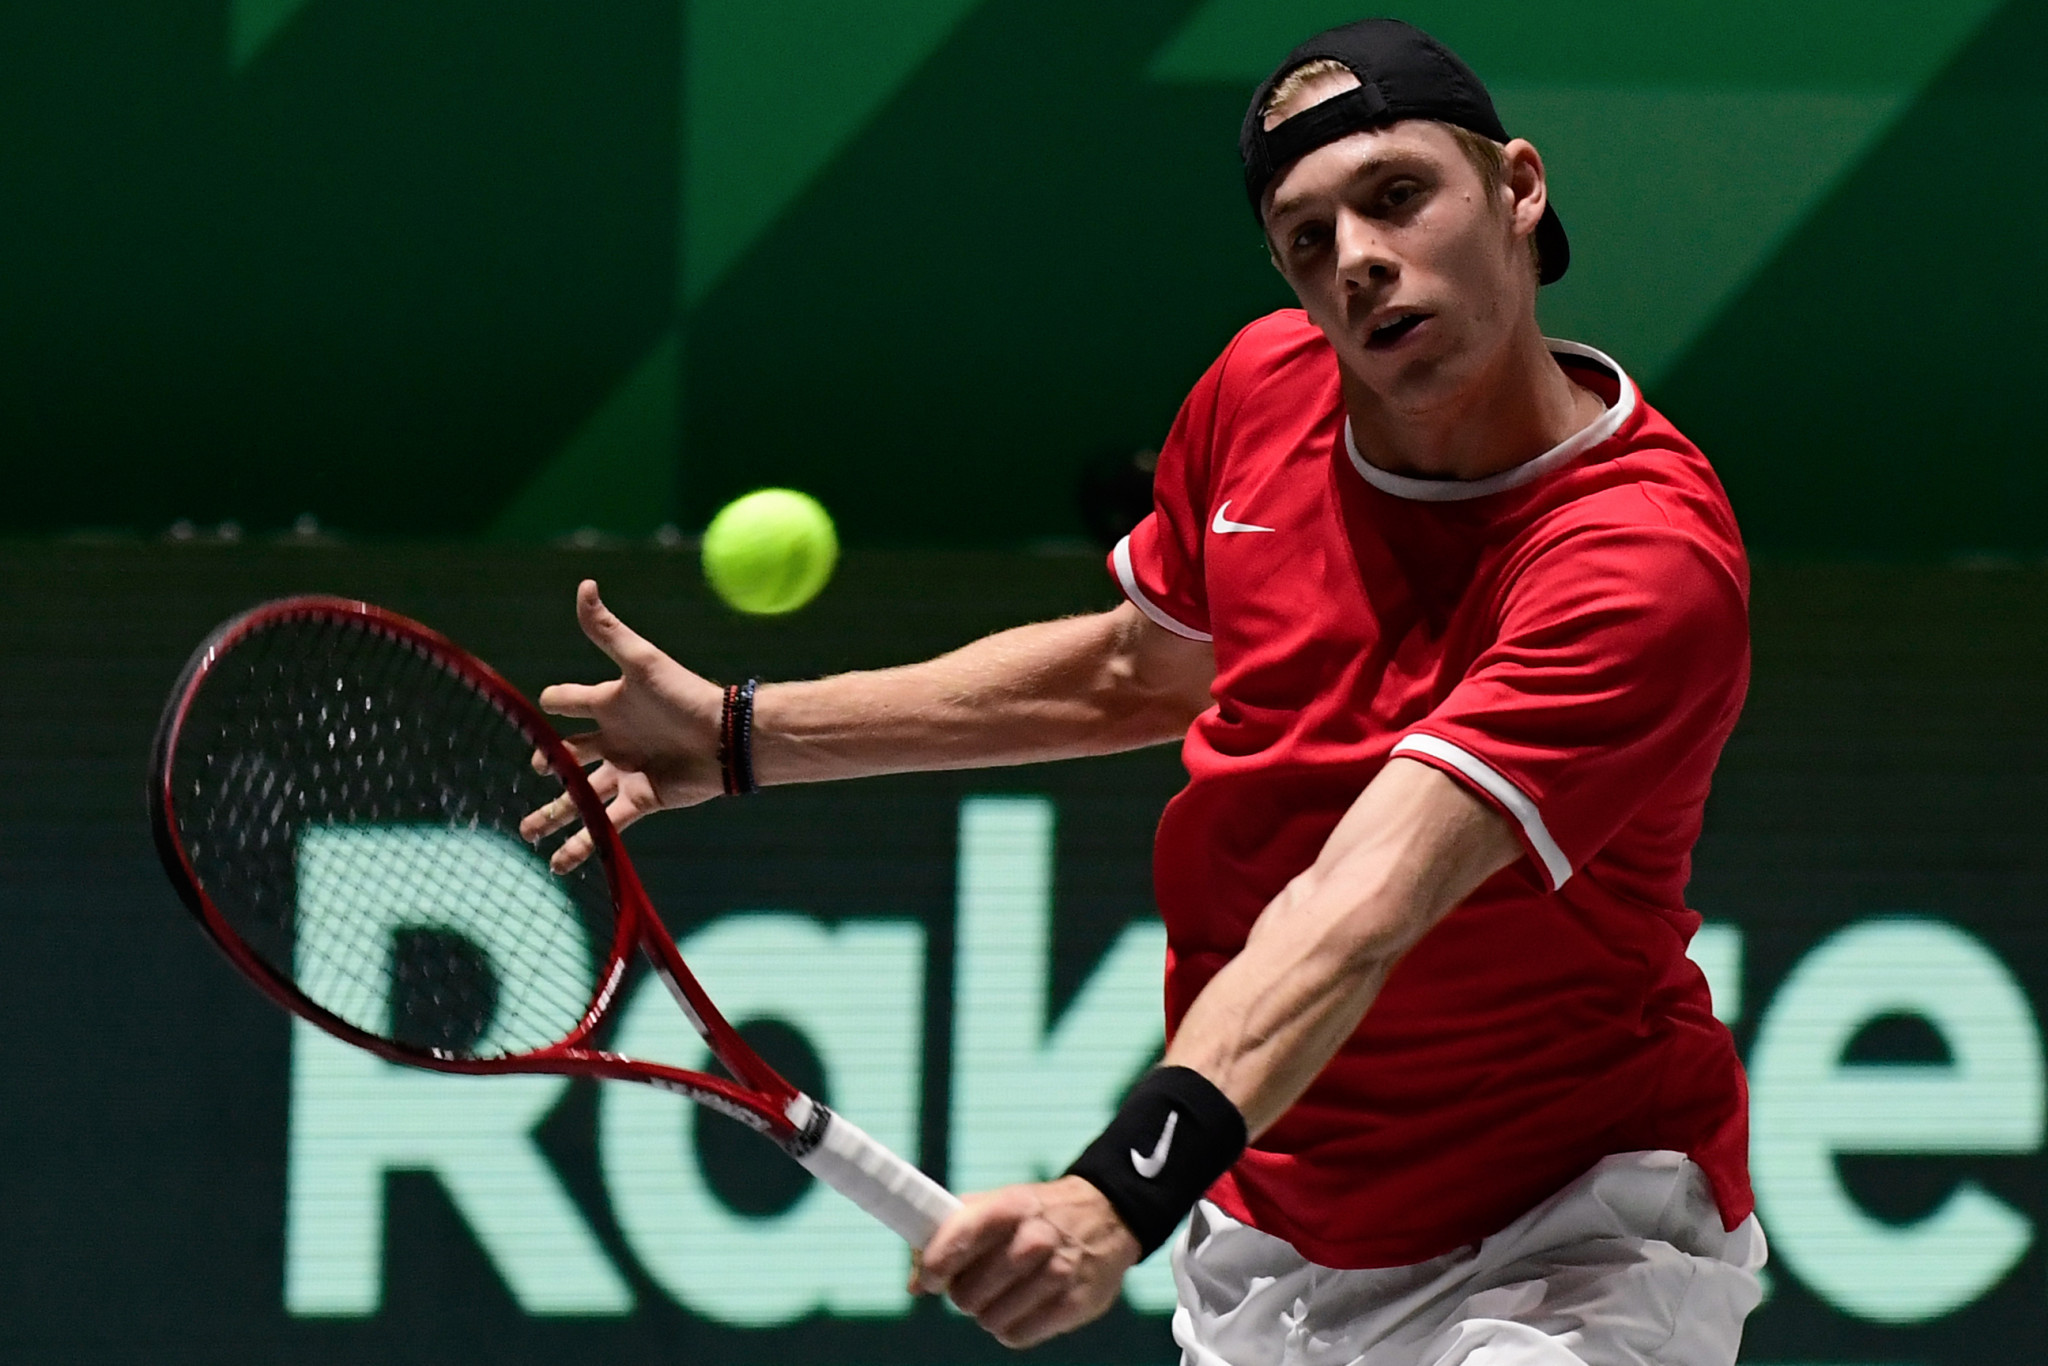 Canada beat the US to reach the quarter-finals of the Davis Cup in Madrid ©Getty Images